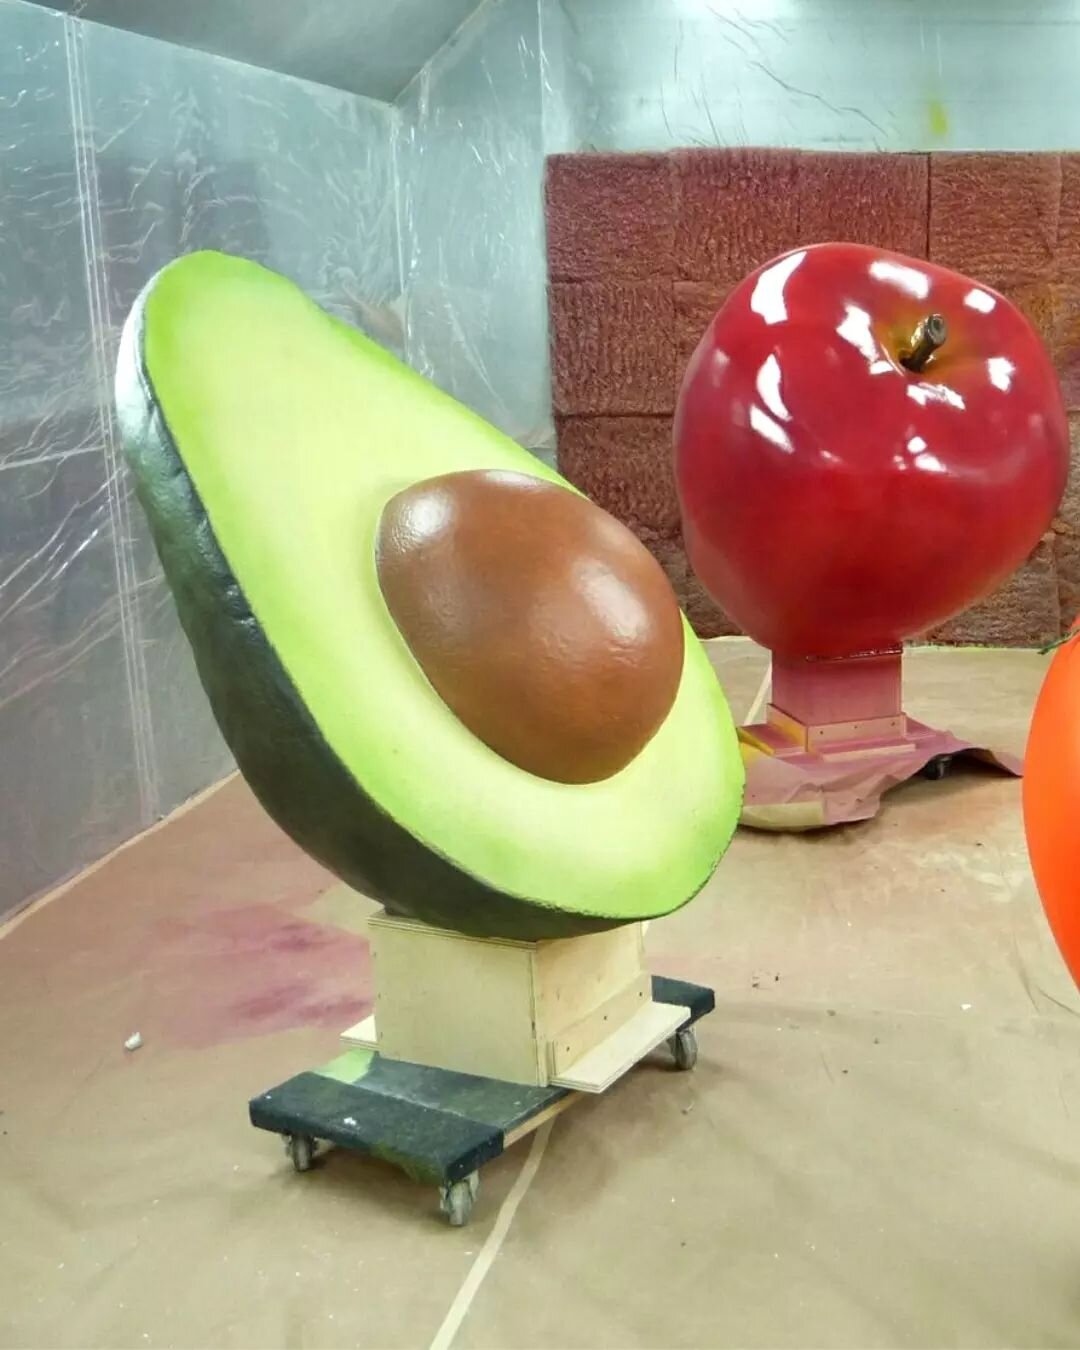 In 2010, we sculpted and painted several produce items, including broccoli, bananas, avocados and more for Target's Fresh campaign, launching their fresh food options | @target

These giant fruits and vegetables were first sculpted as computer models